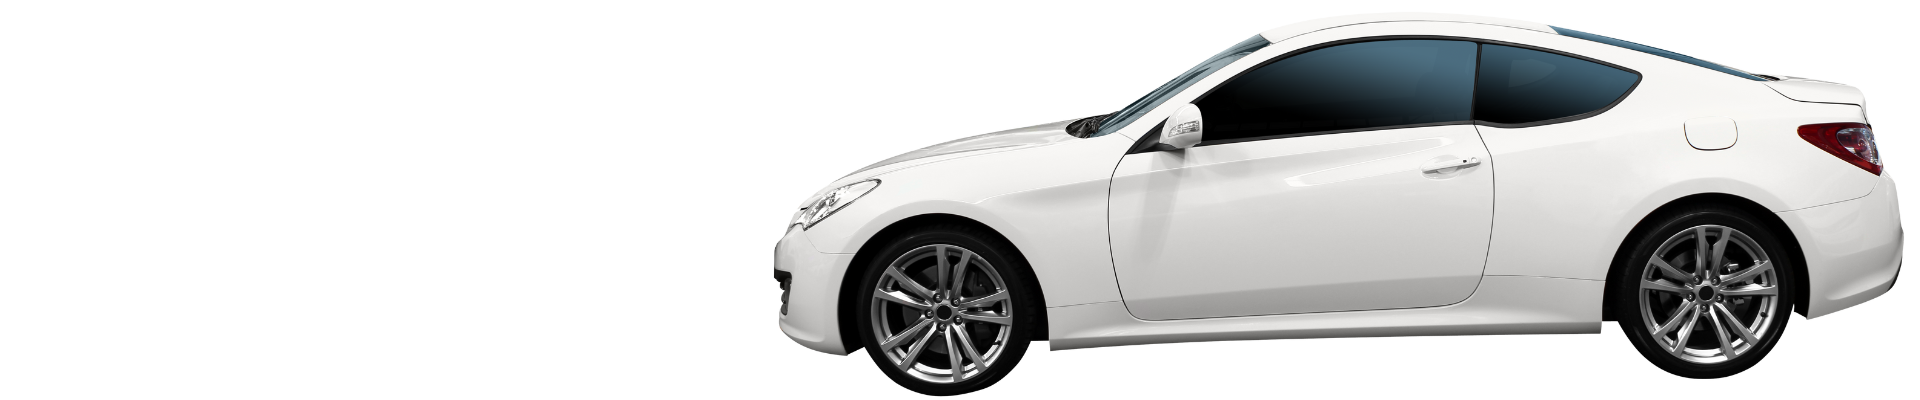 Image of the side view of a white 4 door car.